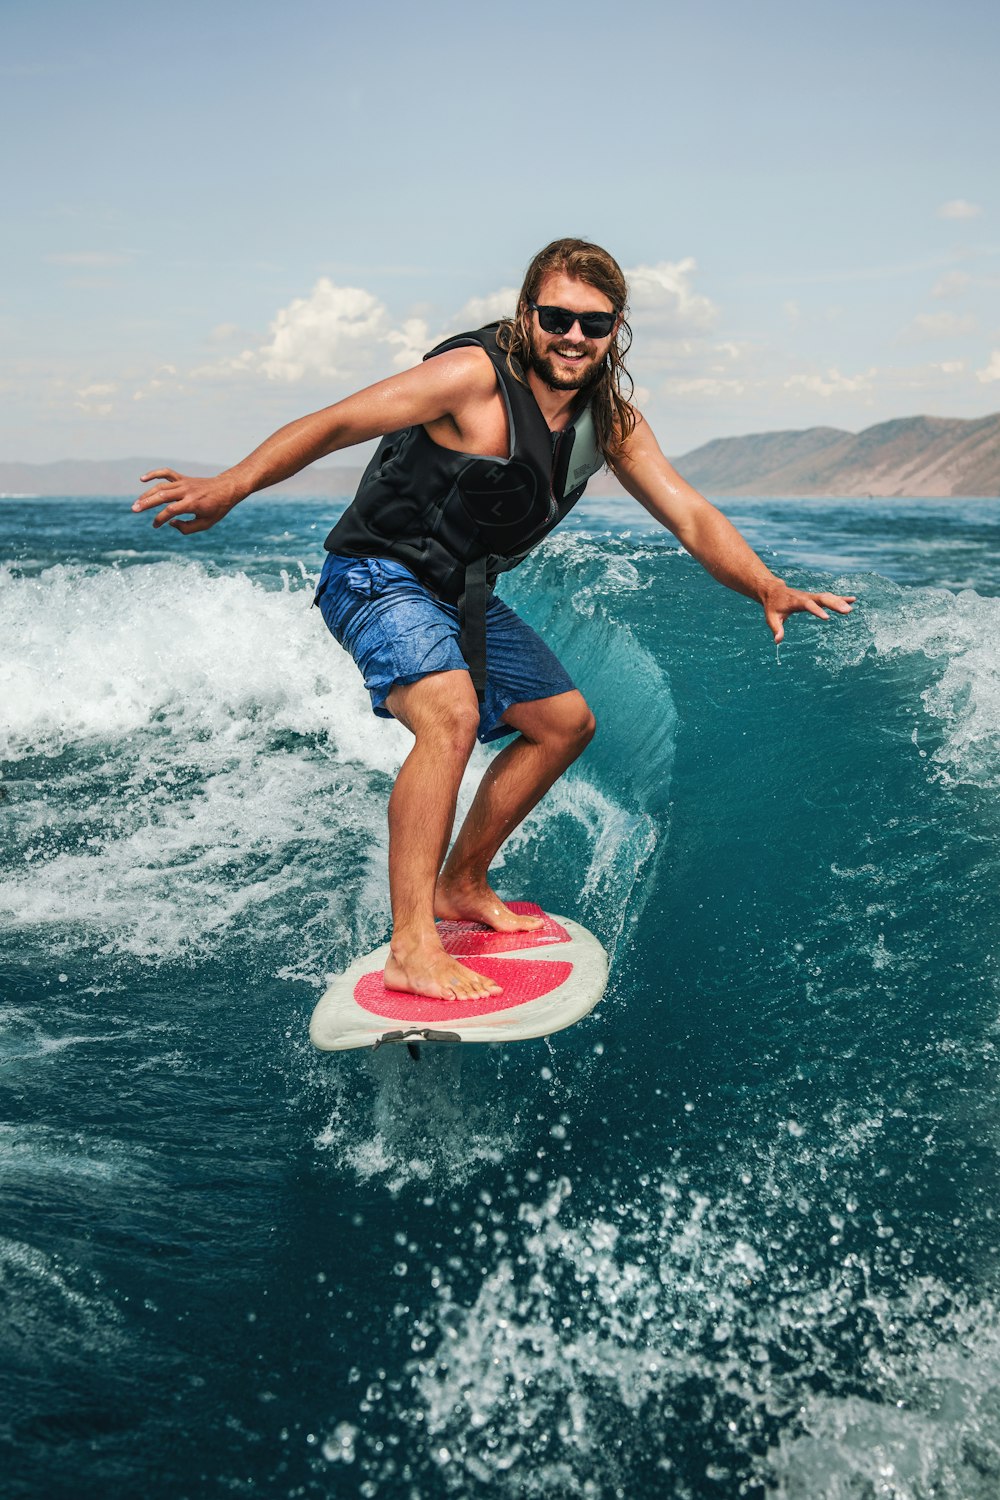 a person riding a surfboard